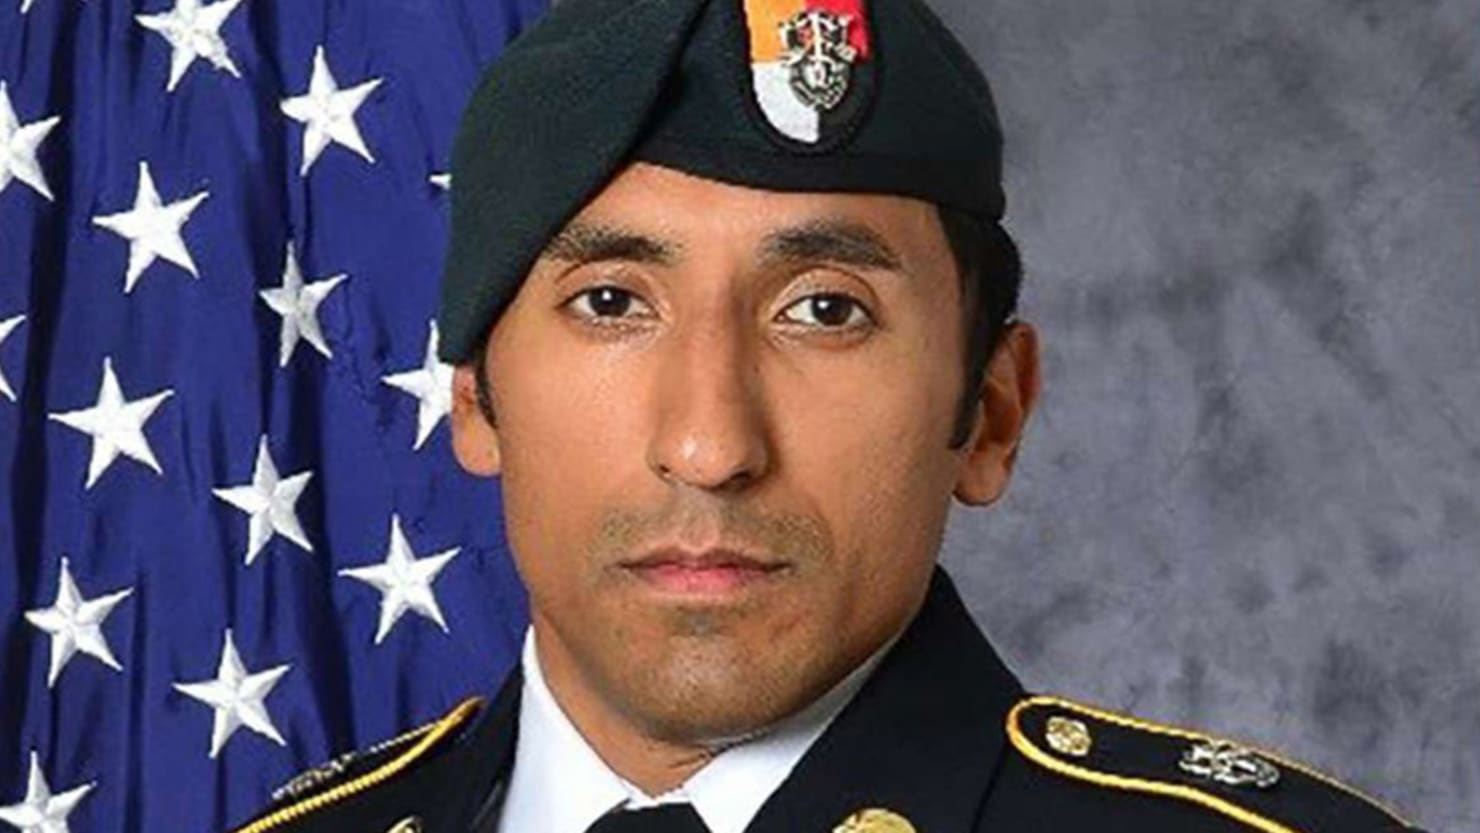 Tony DeDolph, Navy SEAL who smothered green beret to death, sentenced to 10 years